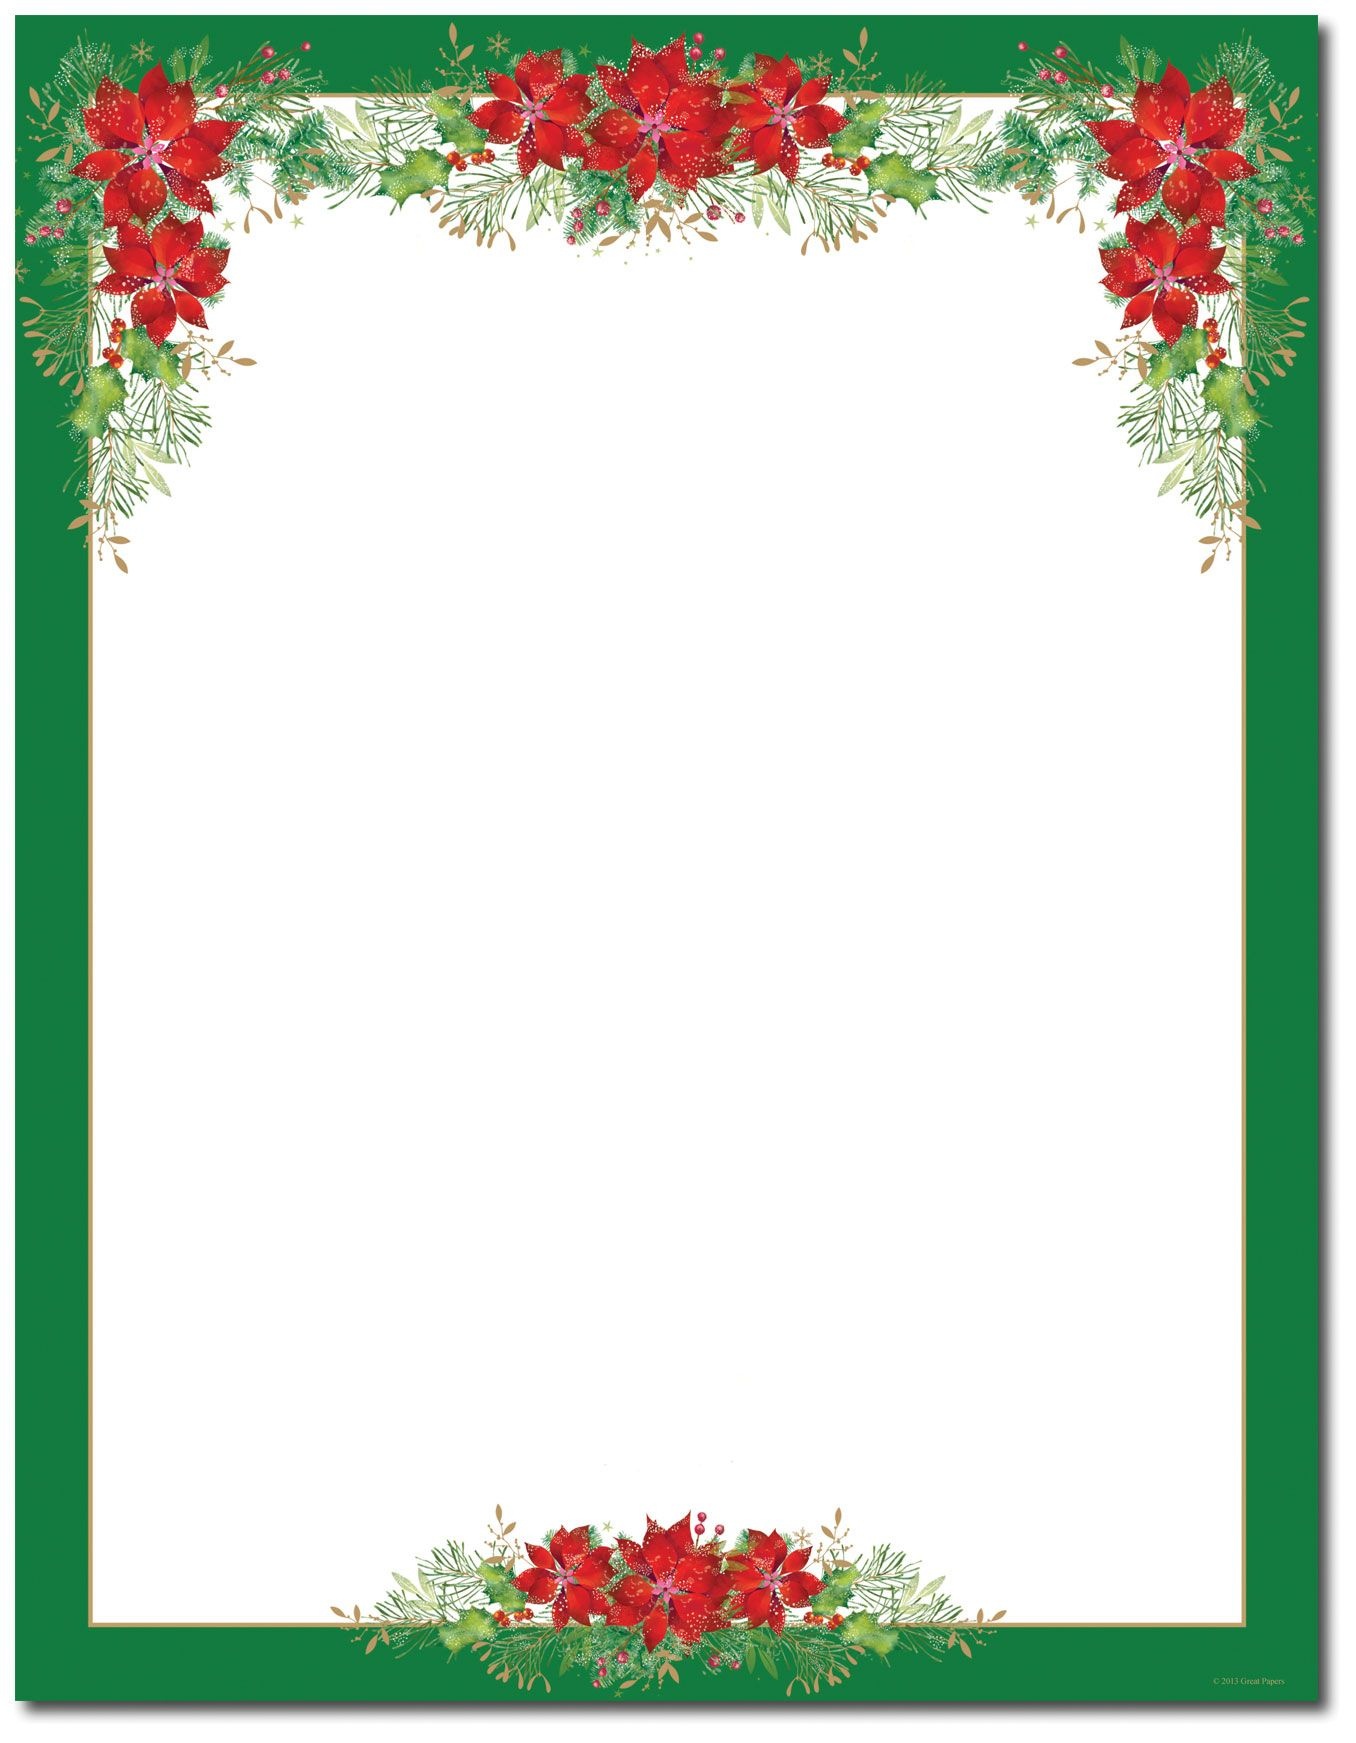 Poinsettia Valance Letterhead | Holiday Papers | Christmas Border - Free Printable Christmas Stationary Paper